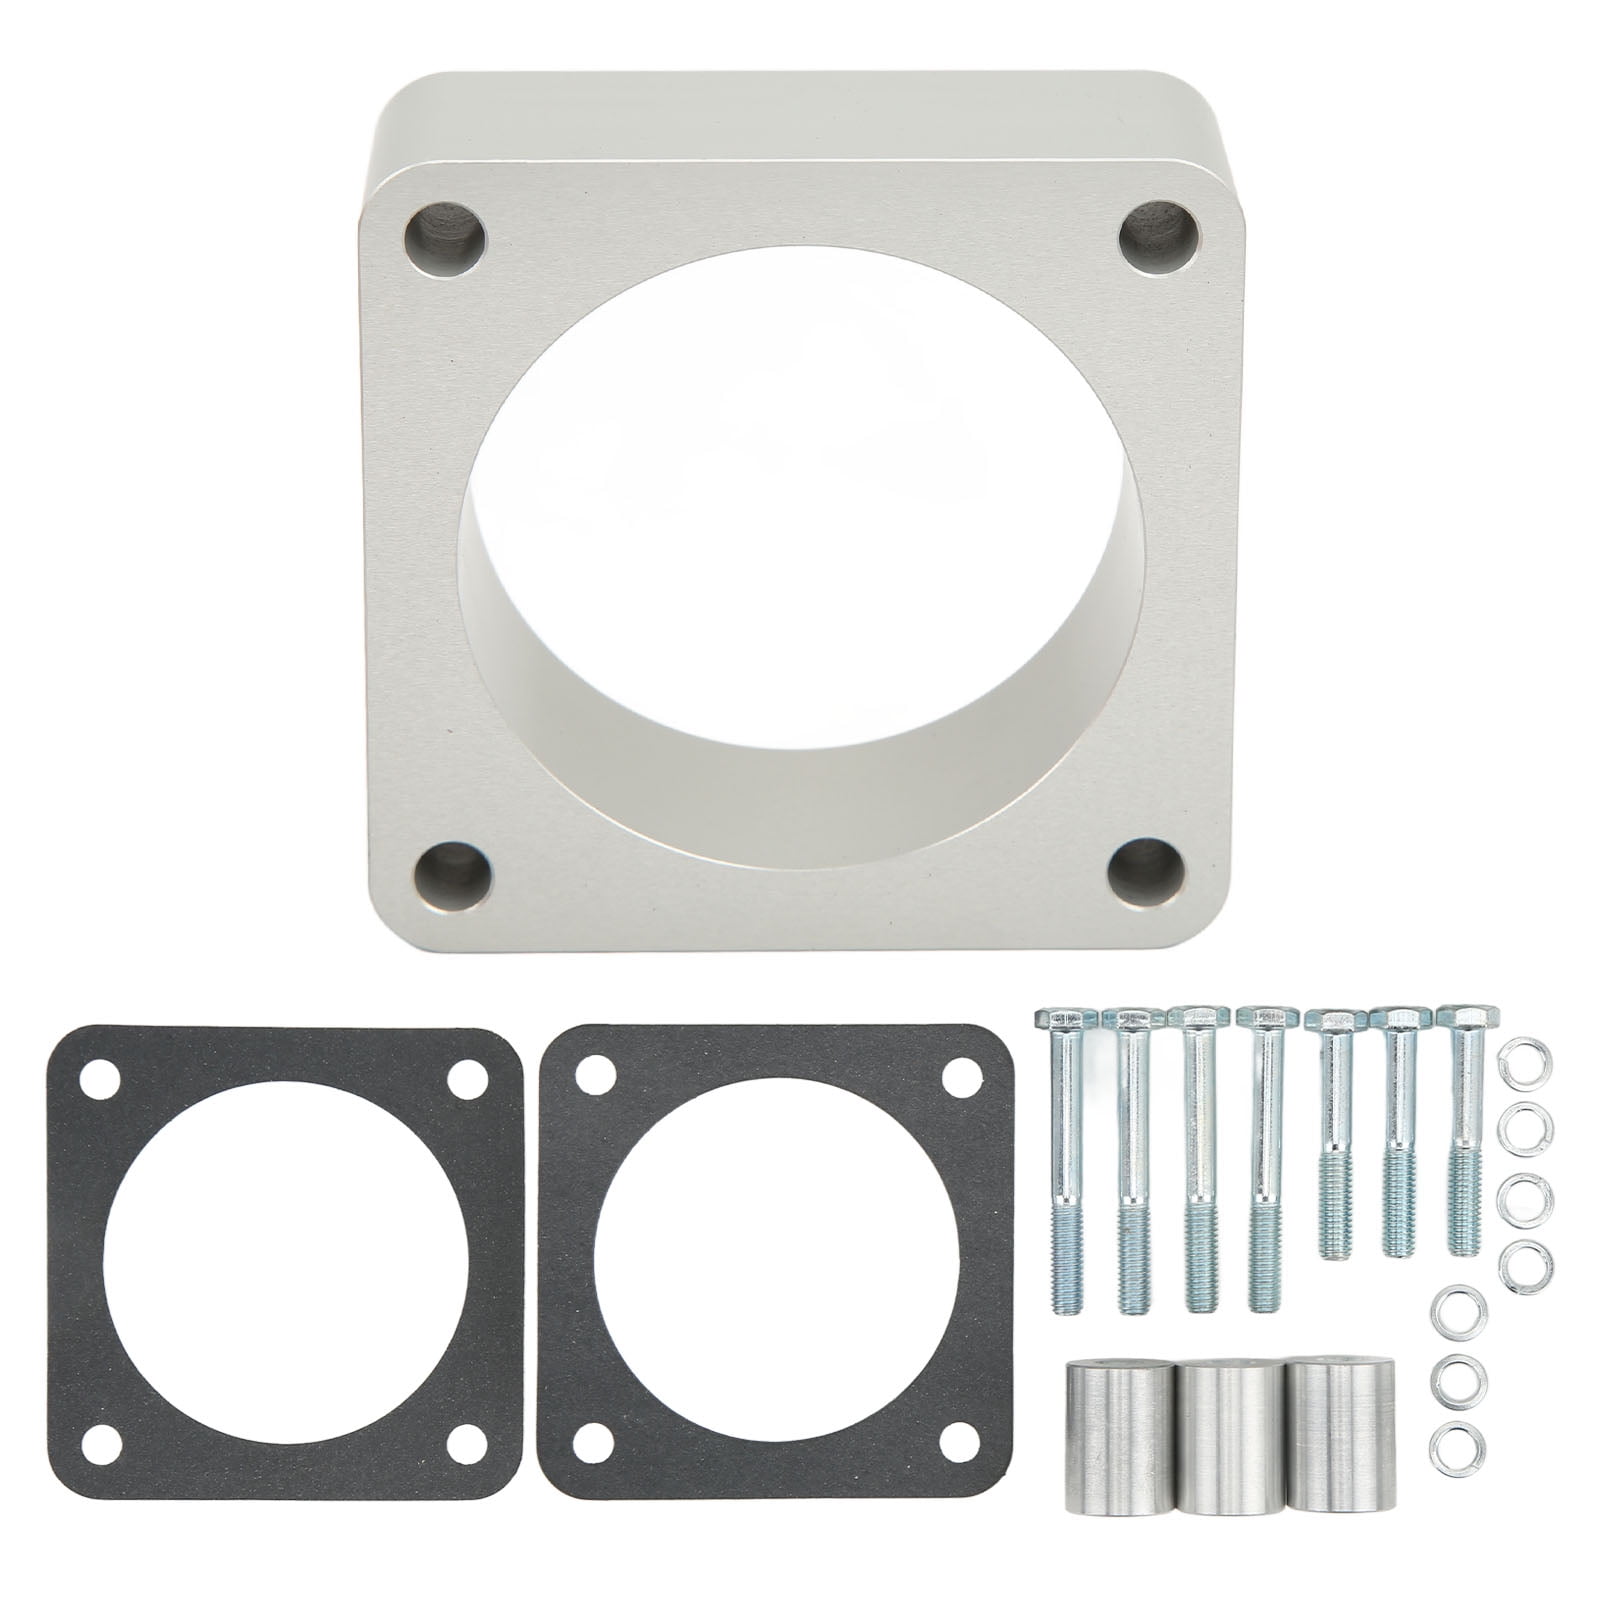 4 Bolt Throttle Body Spacer Metal Throttle Body Adapter Plate Replacement  for JEEP WRANGLER CHEROKEE 